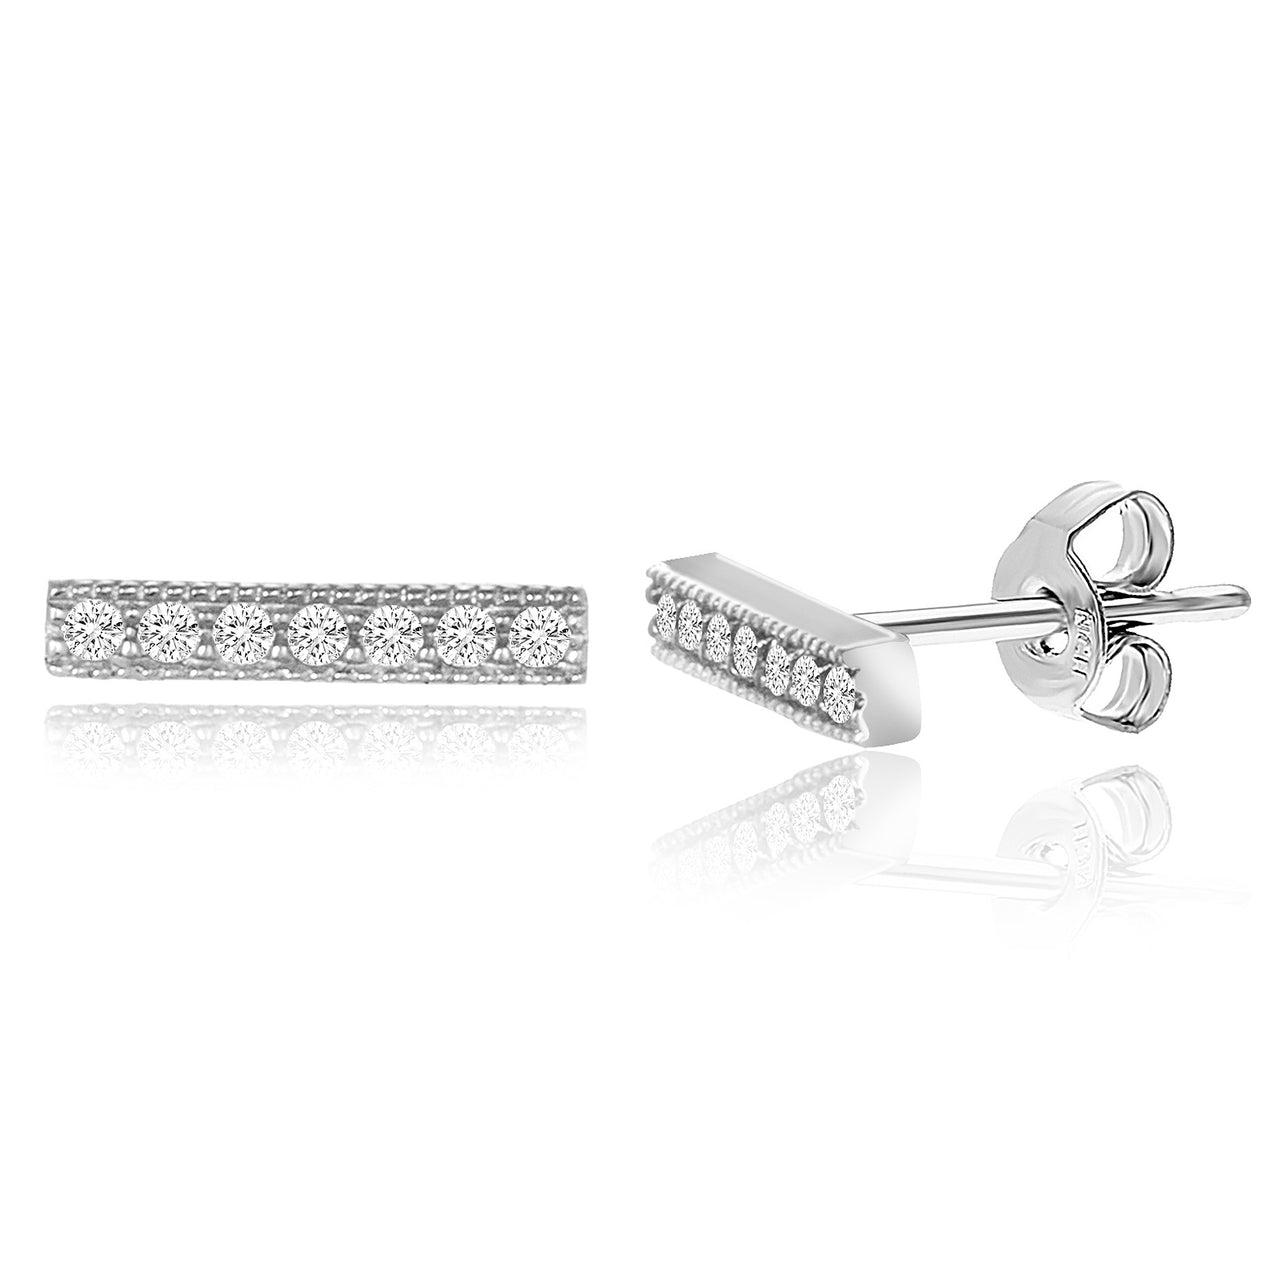 Lesa Michele Rhodium Plated Sterling Silver Cubic Zirconia Bar Earrings